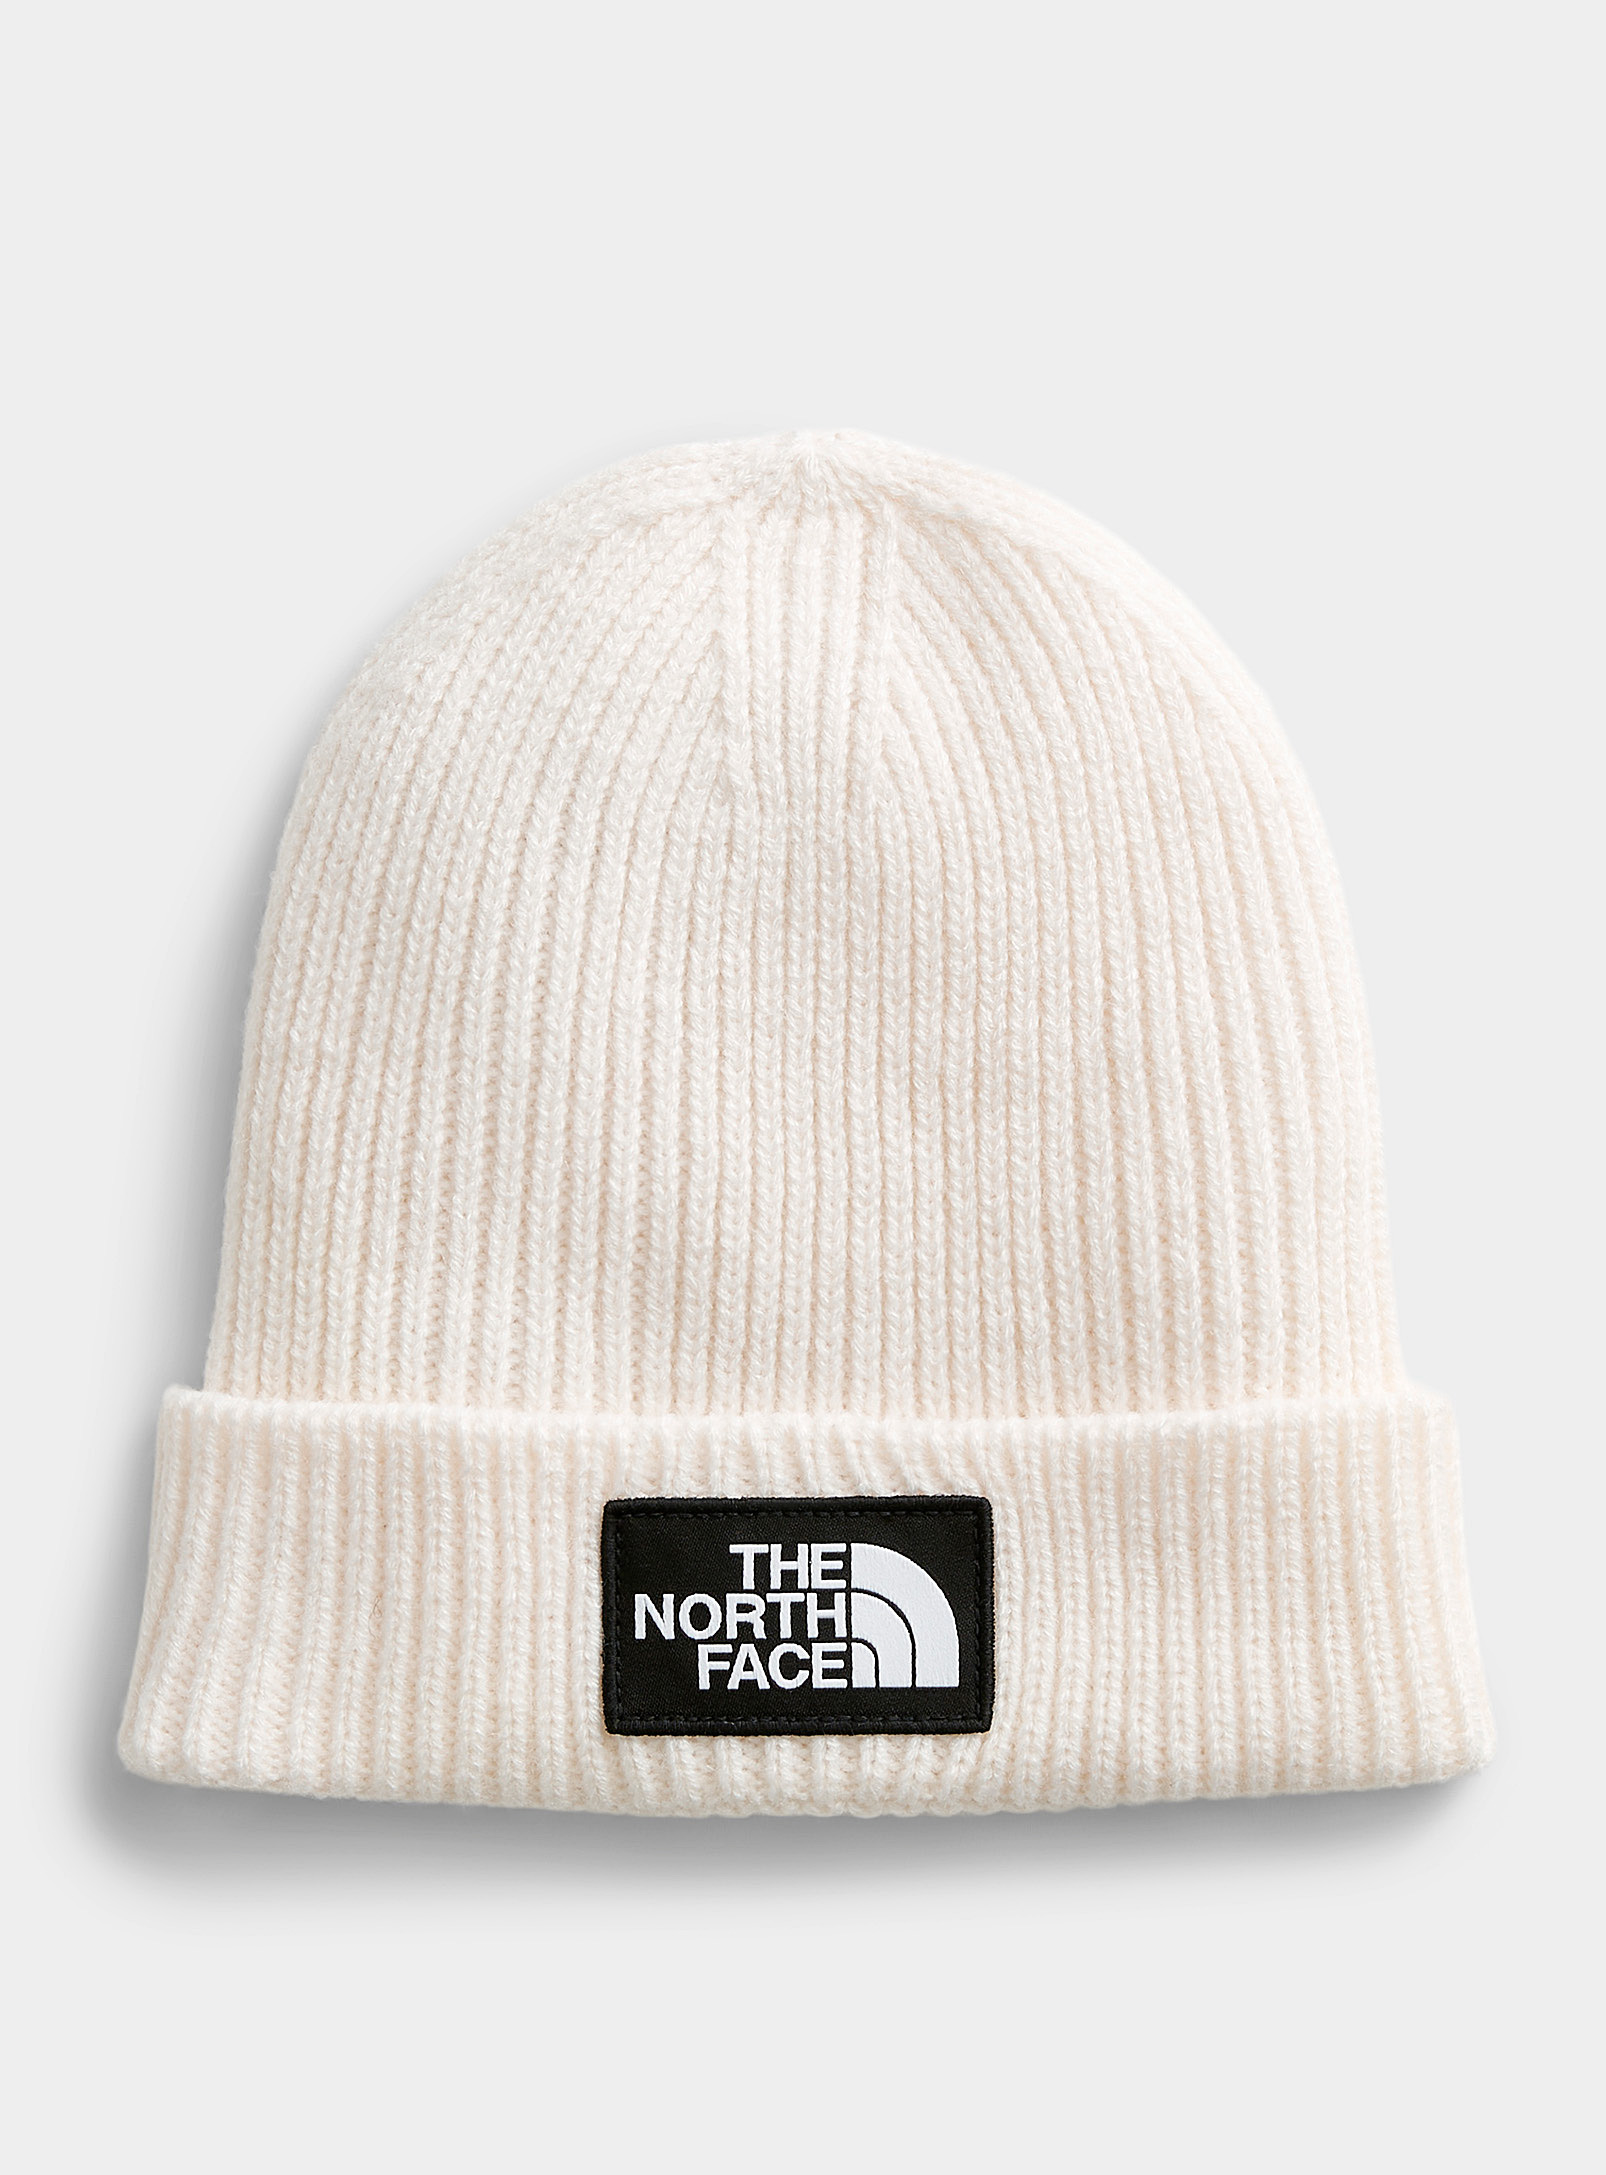 THE NORTH FACE RIBBED KNIT LOGO TUQUE